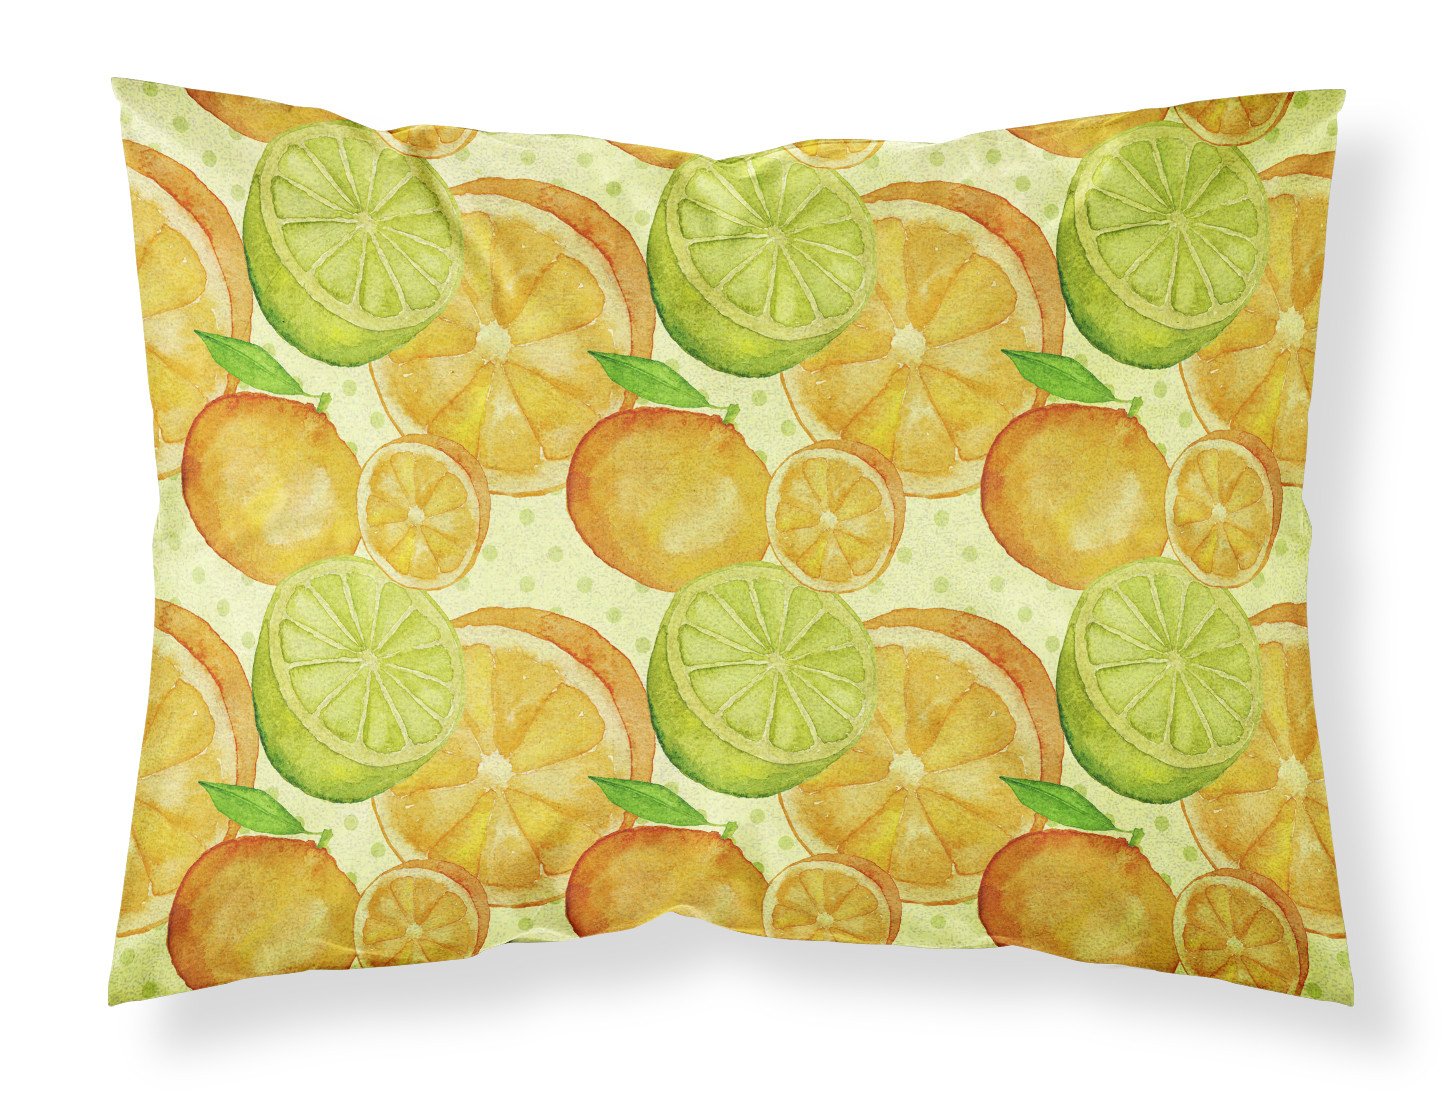 Watercolor Limes and Oranges Citrus Fabric Standard Pillowcase BB7517PILLOWCASE by Caroline's Treasures